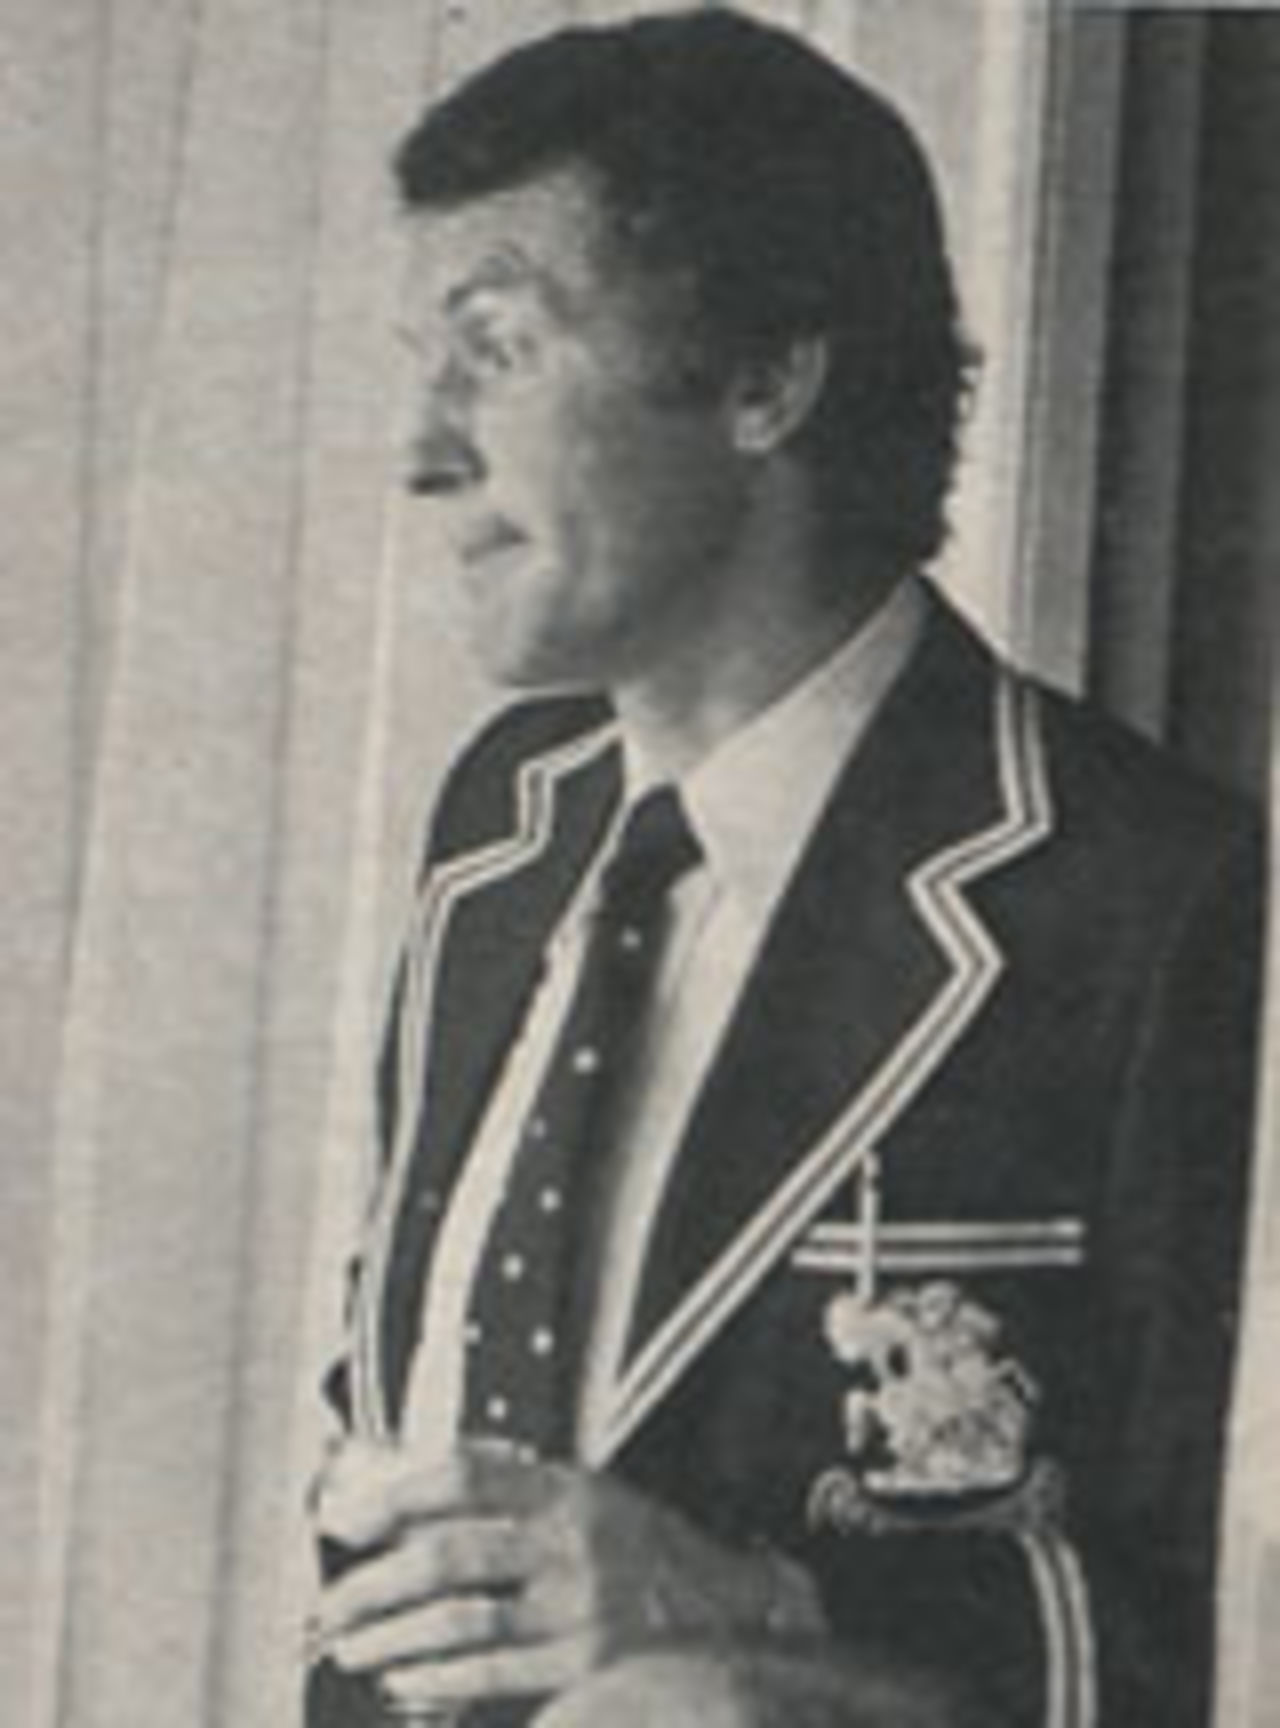 Mike Denness after the defeat at Edgbaston - hours later he was sacked as England captain, July 1975